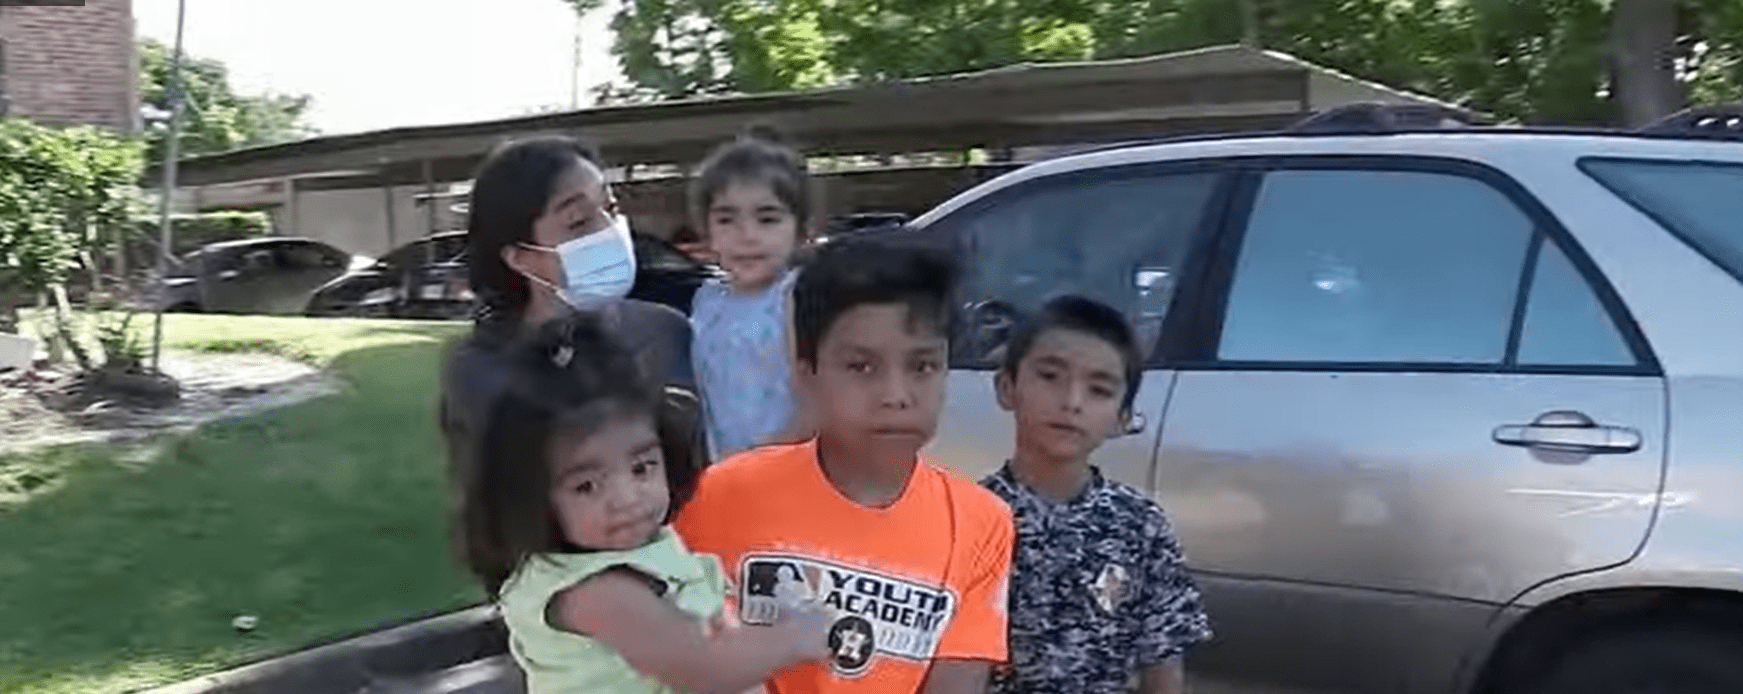 Kenia Madrigal with her four children. | Source: youtube.com/ABC13 Houston